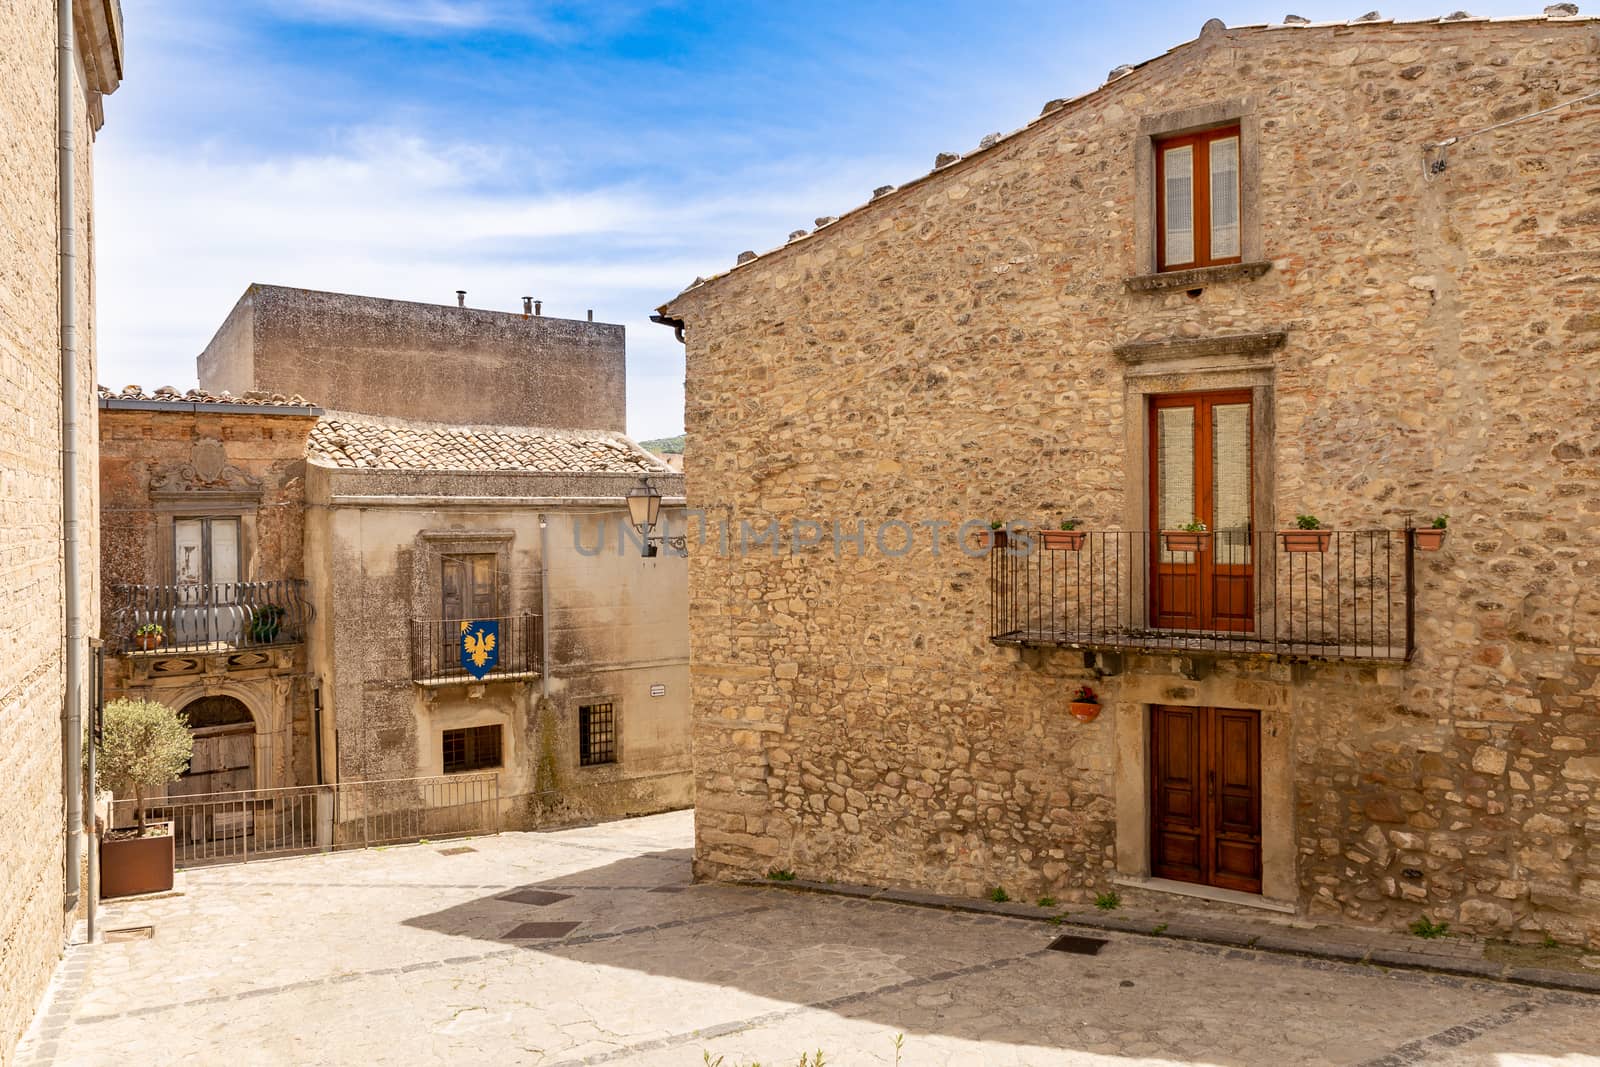 glimpse of a typical Sicilian medieval village